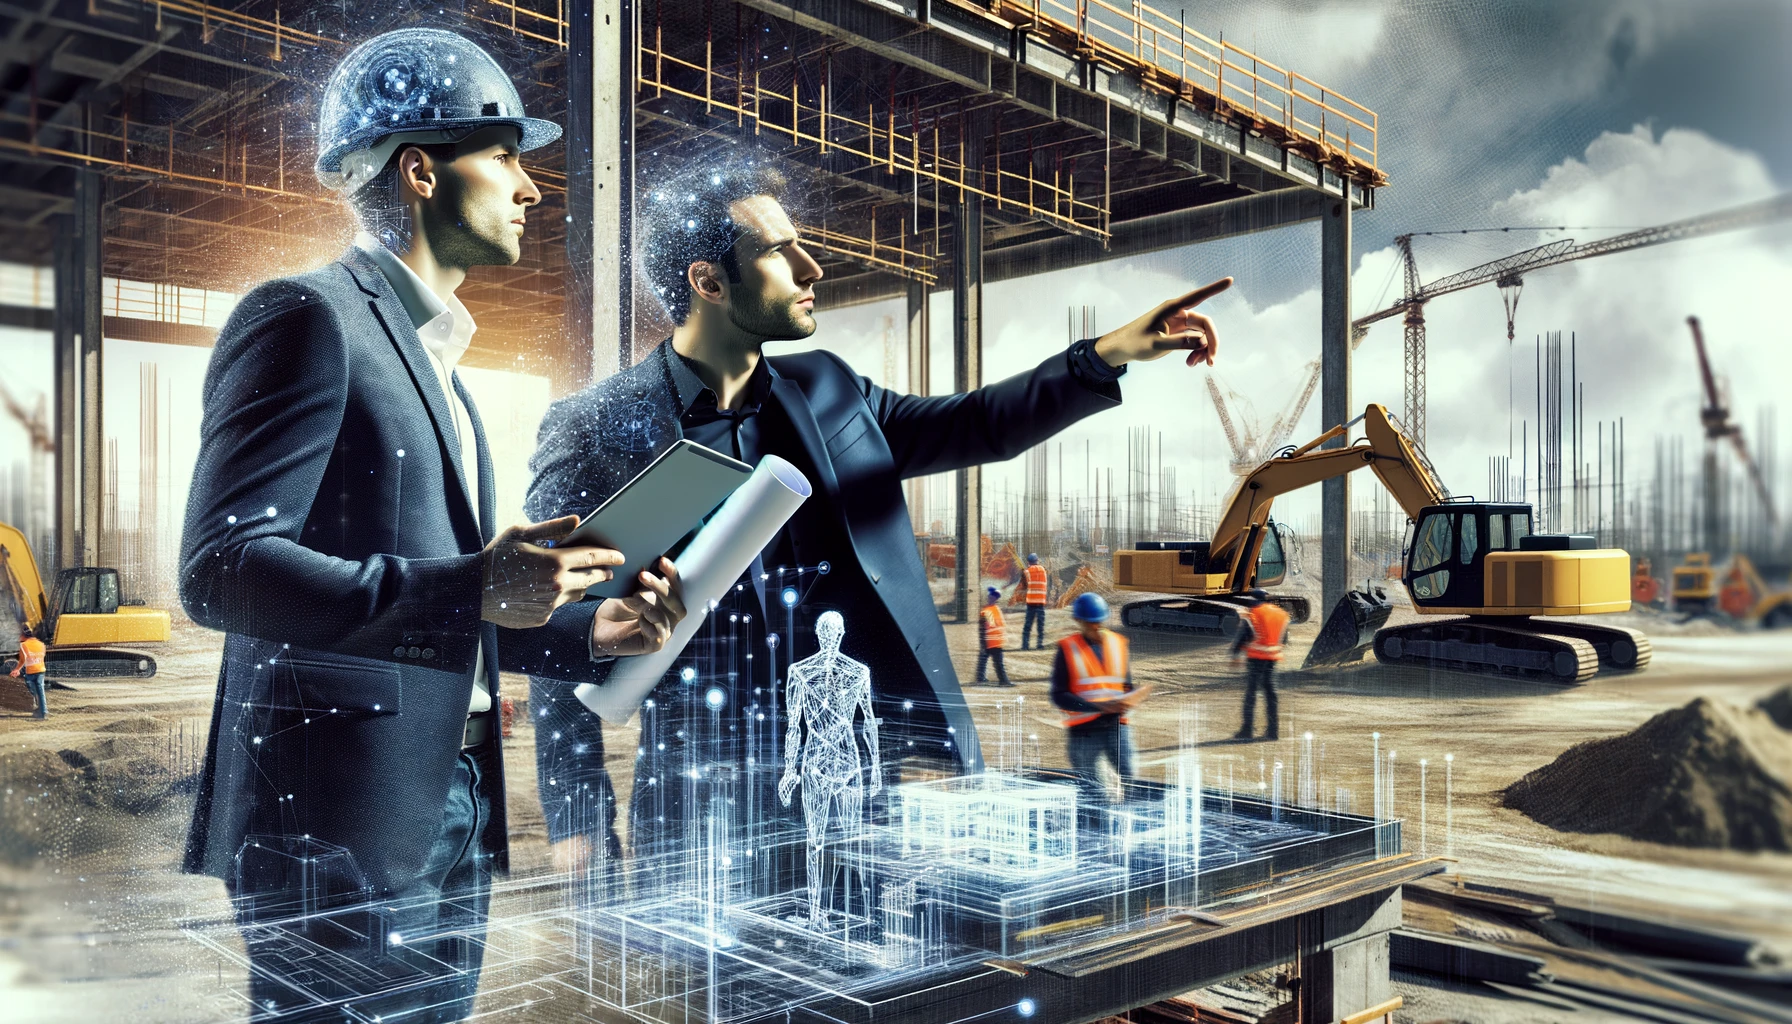 dynamic illustration for the article on AI in construction monitoring, inspired by the composition you provided. The scene features two professionals at a construction site, with one explaining AI-driven data and the other holding blueprints. You can view and use the image from the preview above.